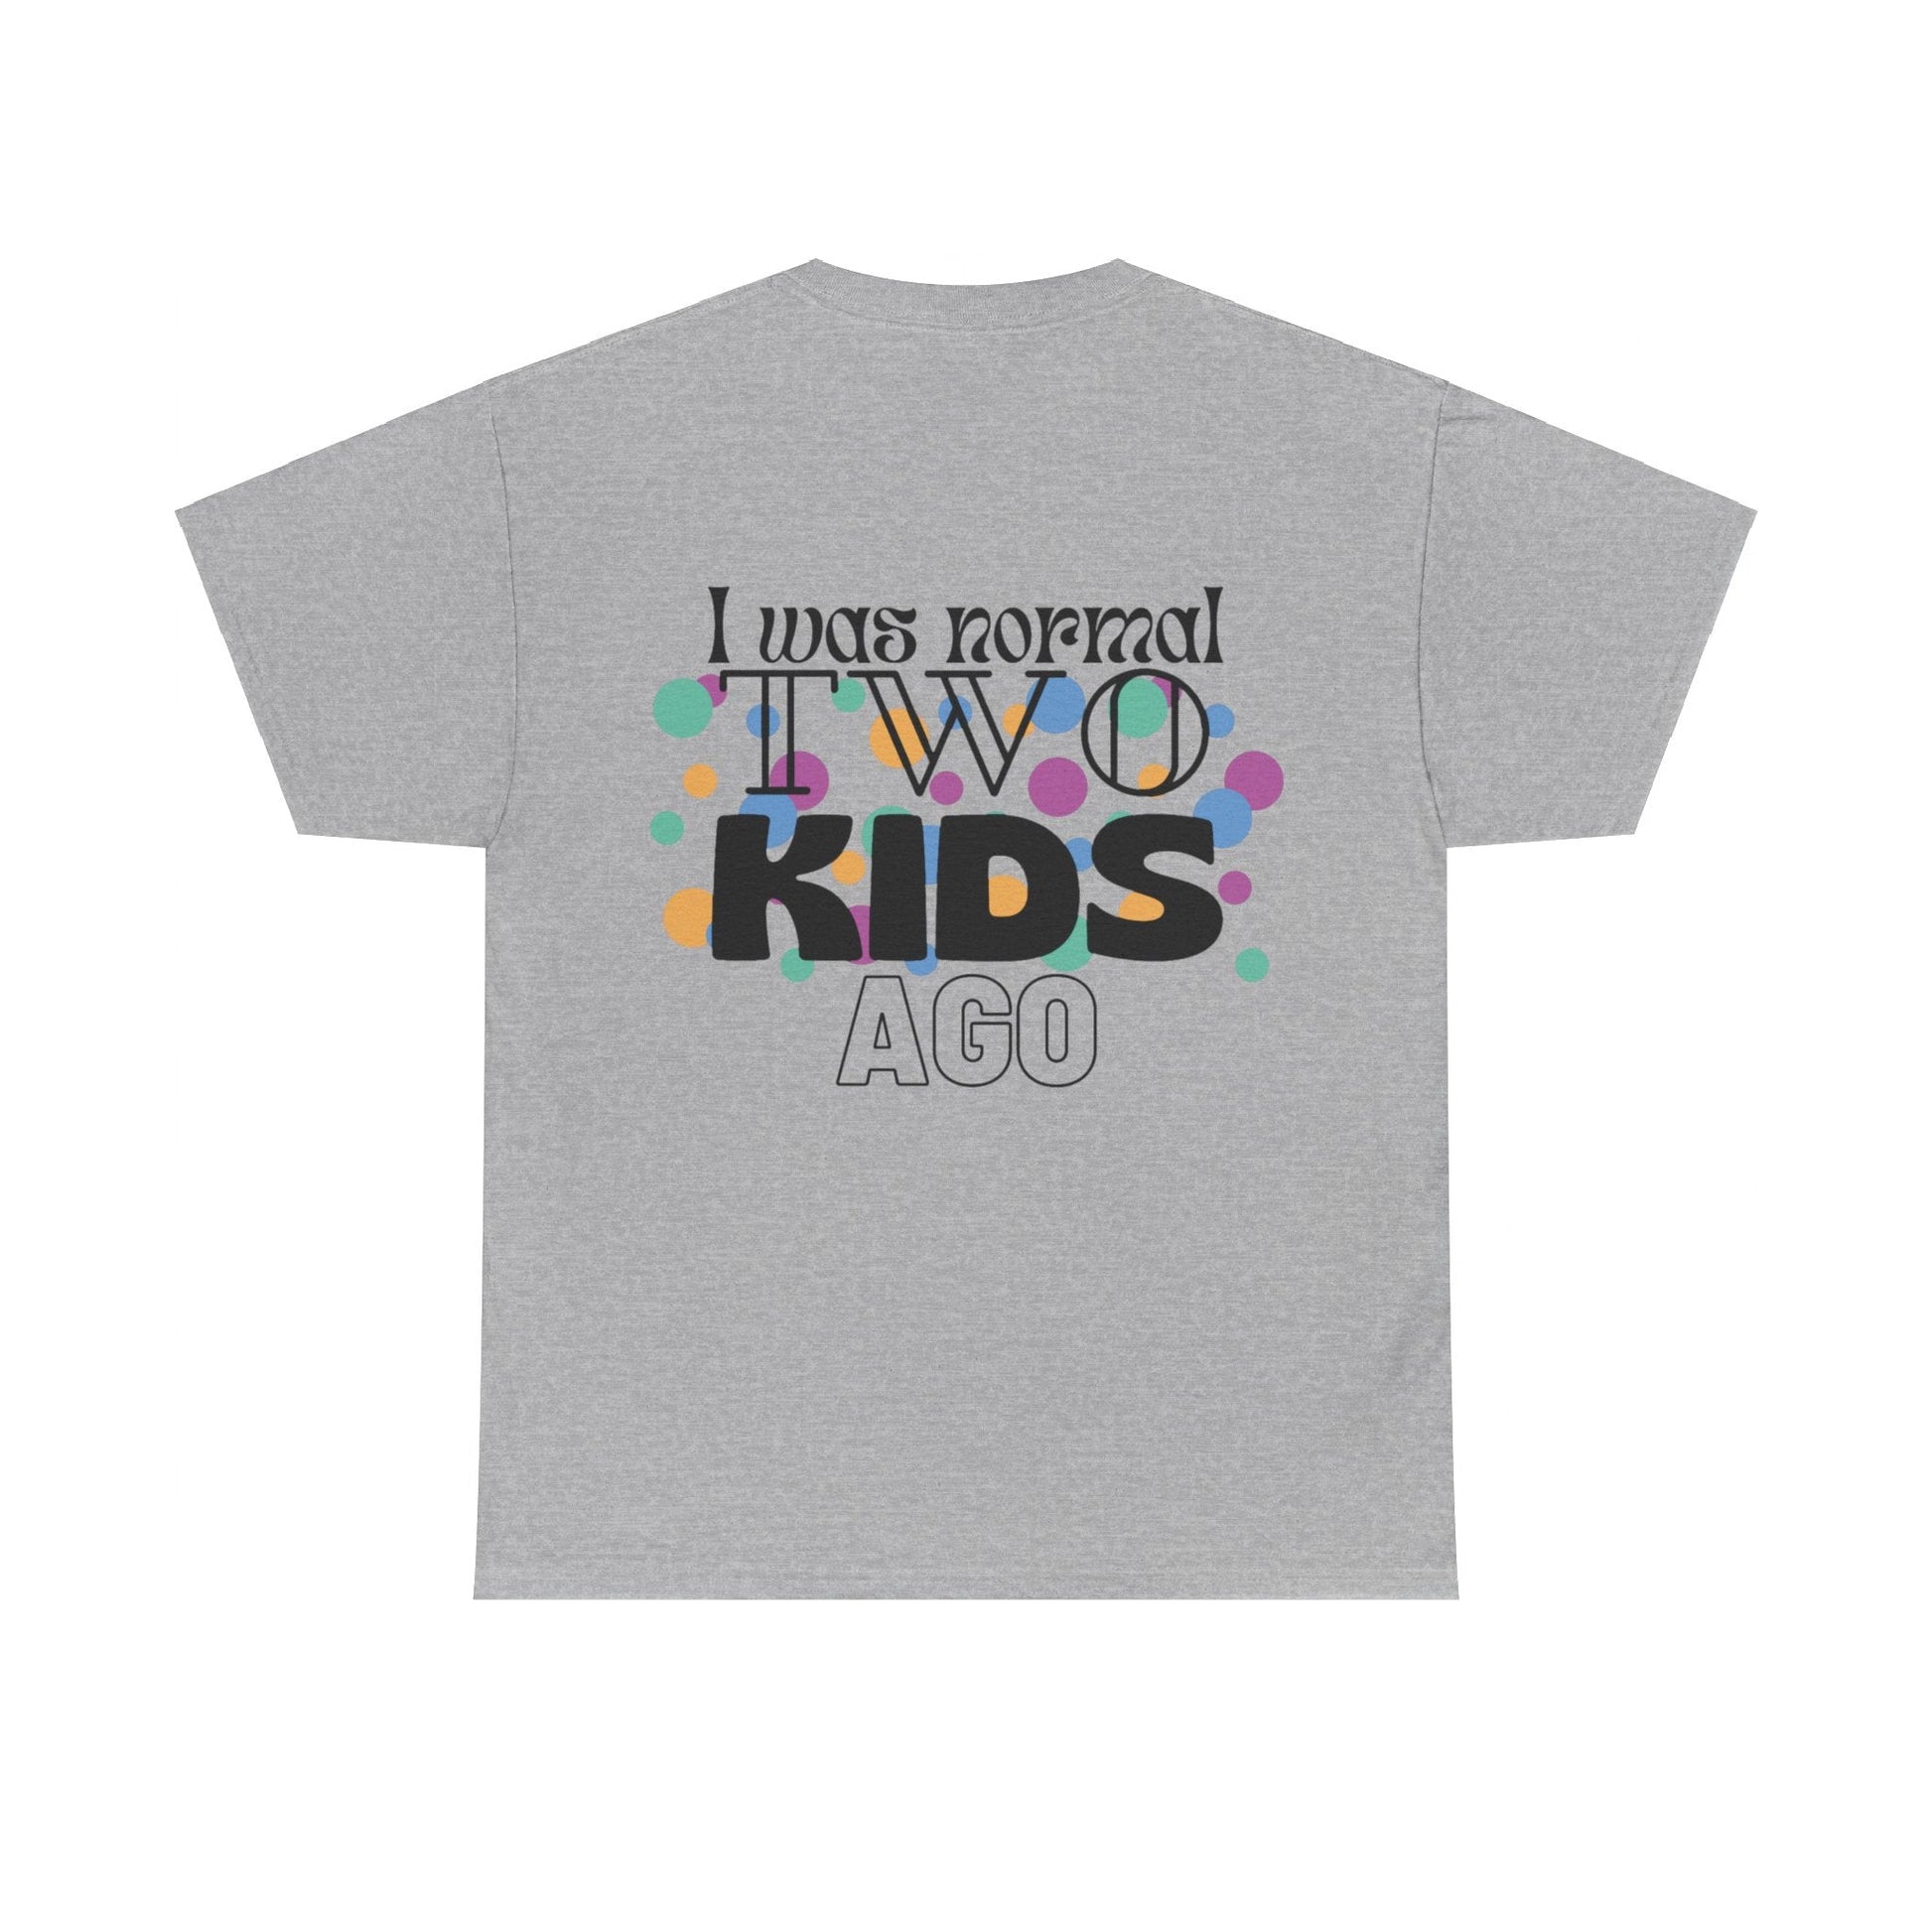 I was normal two kids ago - Custom t - Shirts - For mom - S to 3XL - Alex's Store - White - 